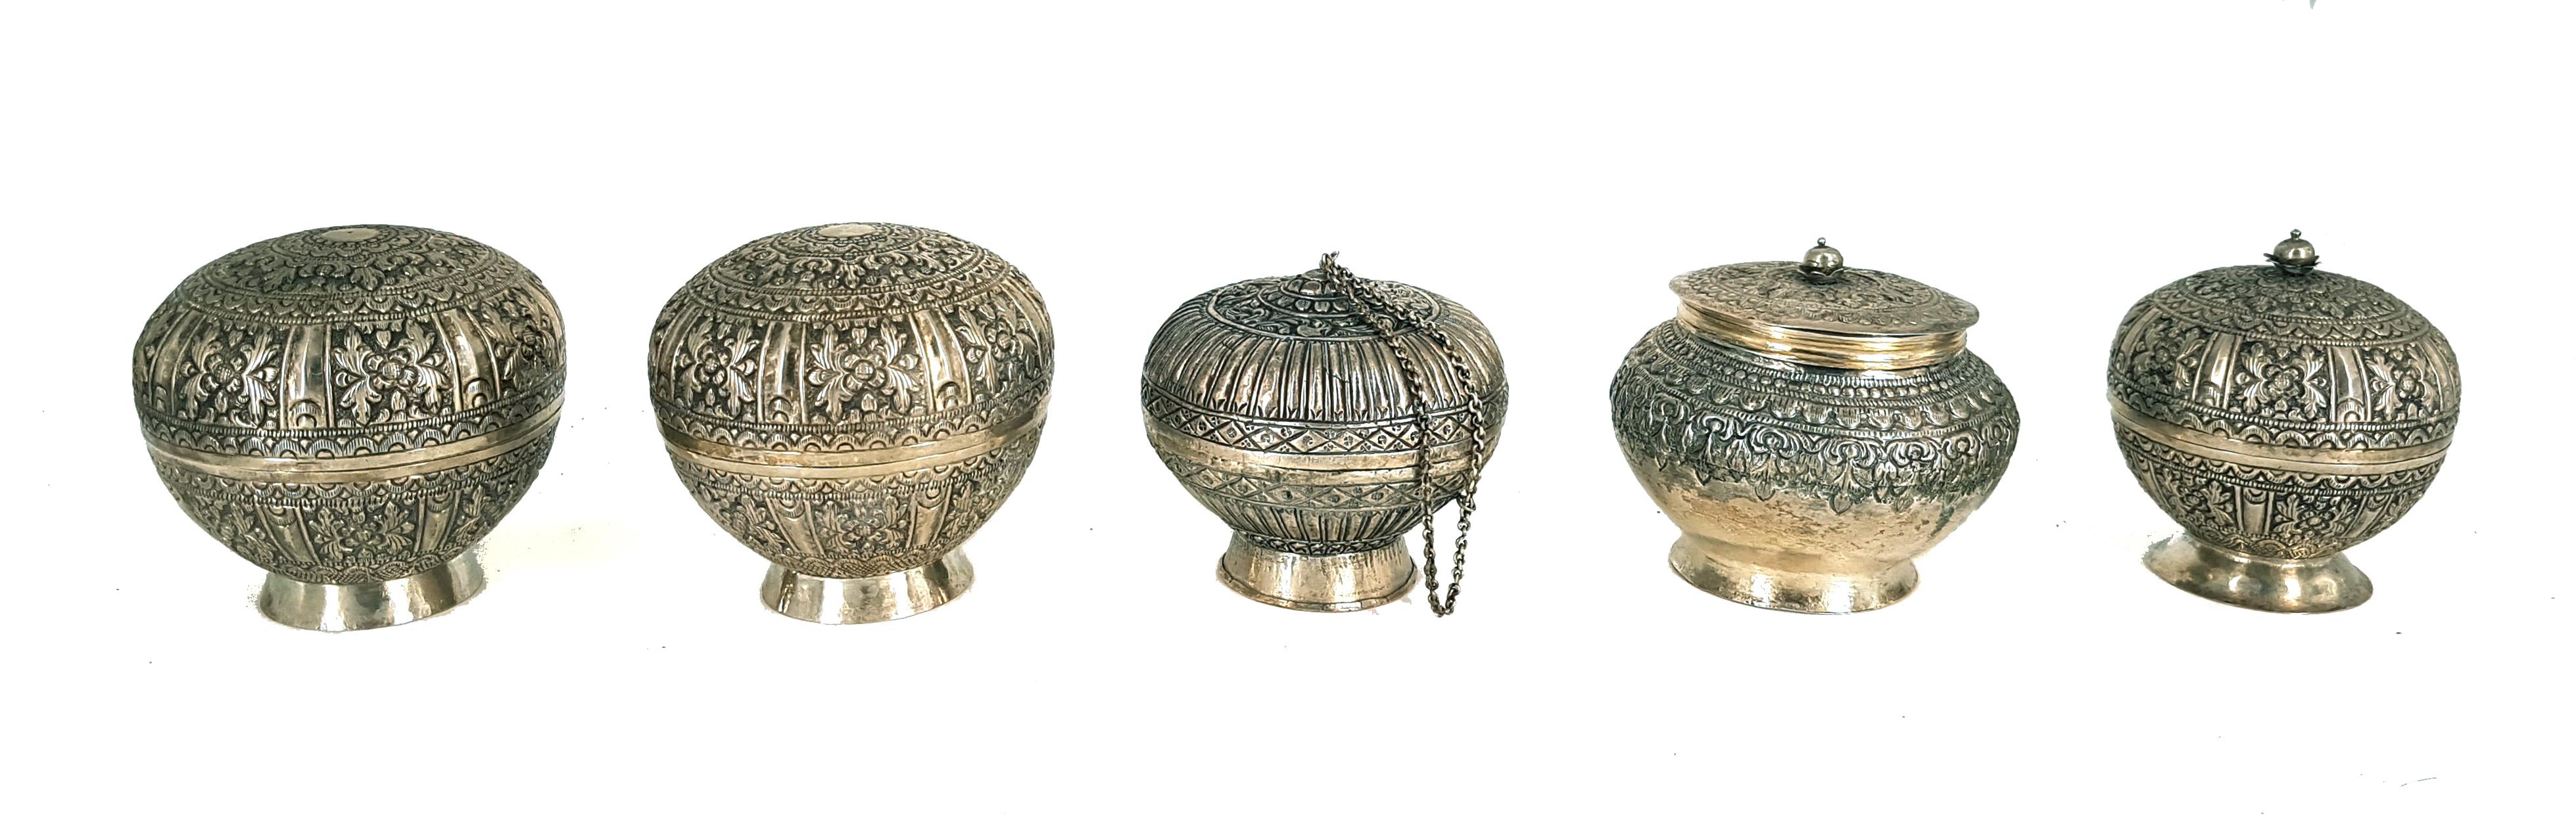 There are five globular vessels with Indonesian lids in repoussé silver.

Dimensions:
1 H 7.5 cm diameter 4.5 cm
2 H 7 cm diameter 6 cm
3 H 7.5 cm diameter 7.5 cm
4 H 7 cm diameter 7 cm
5 H 7.5 cm diameter 7.5 cm
